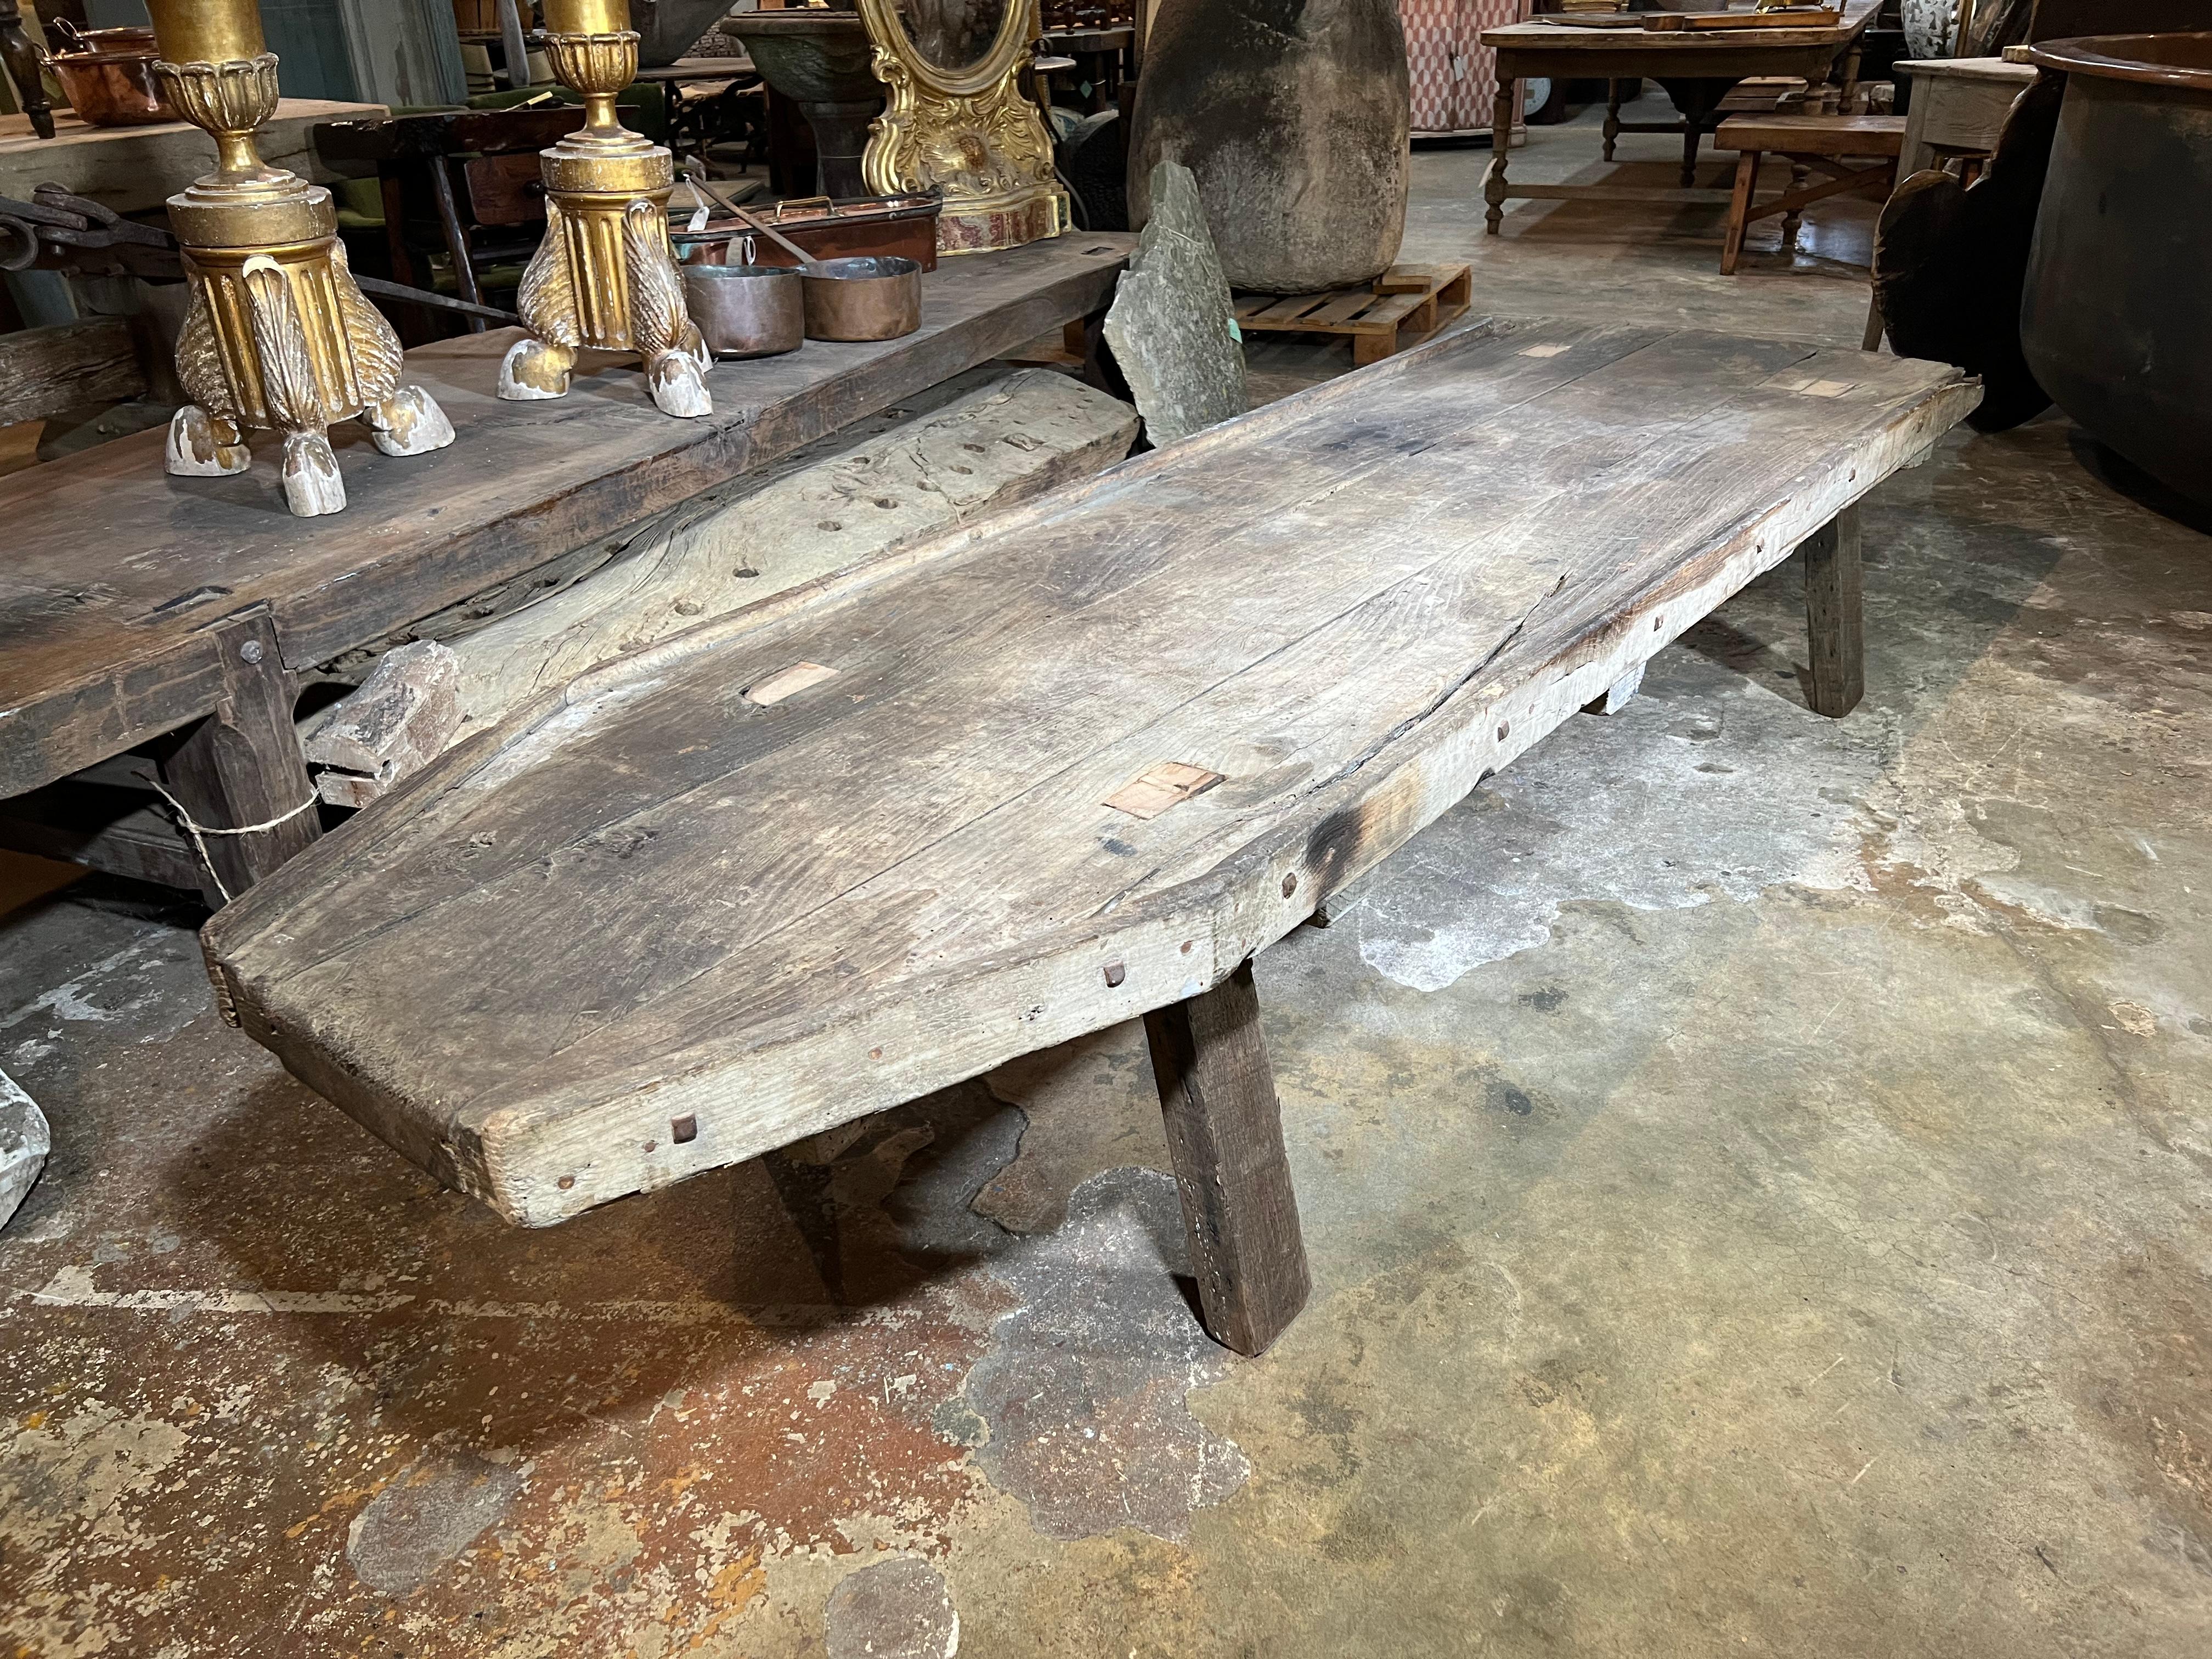 A terrific mid-19th century grand scale Cheese board table - originally used in making cheese. Perfect as a table basse - coffee table. Sturdily constructed from pine. A great addition to any modern or rustic environment.